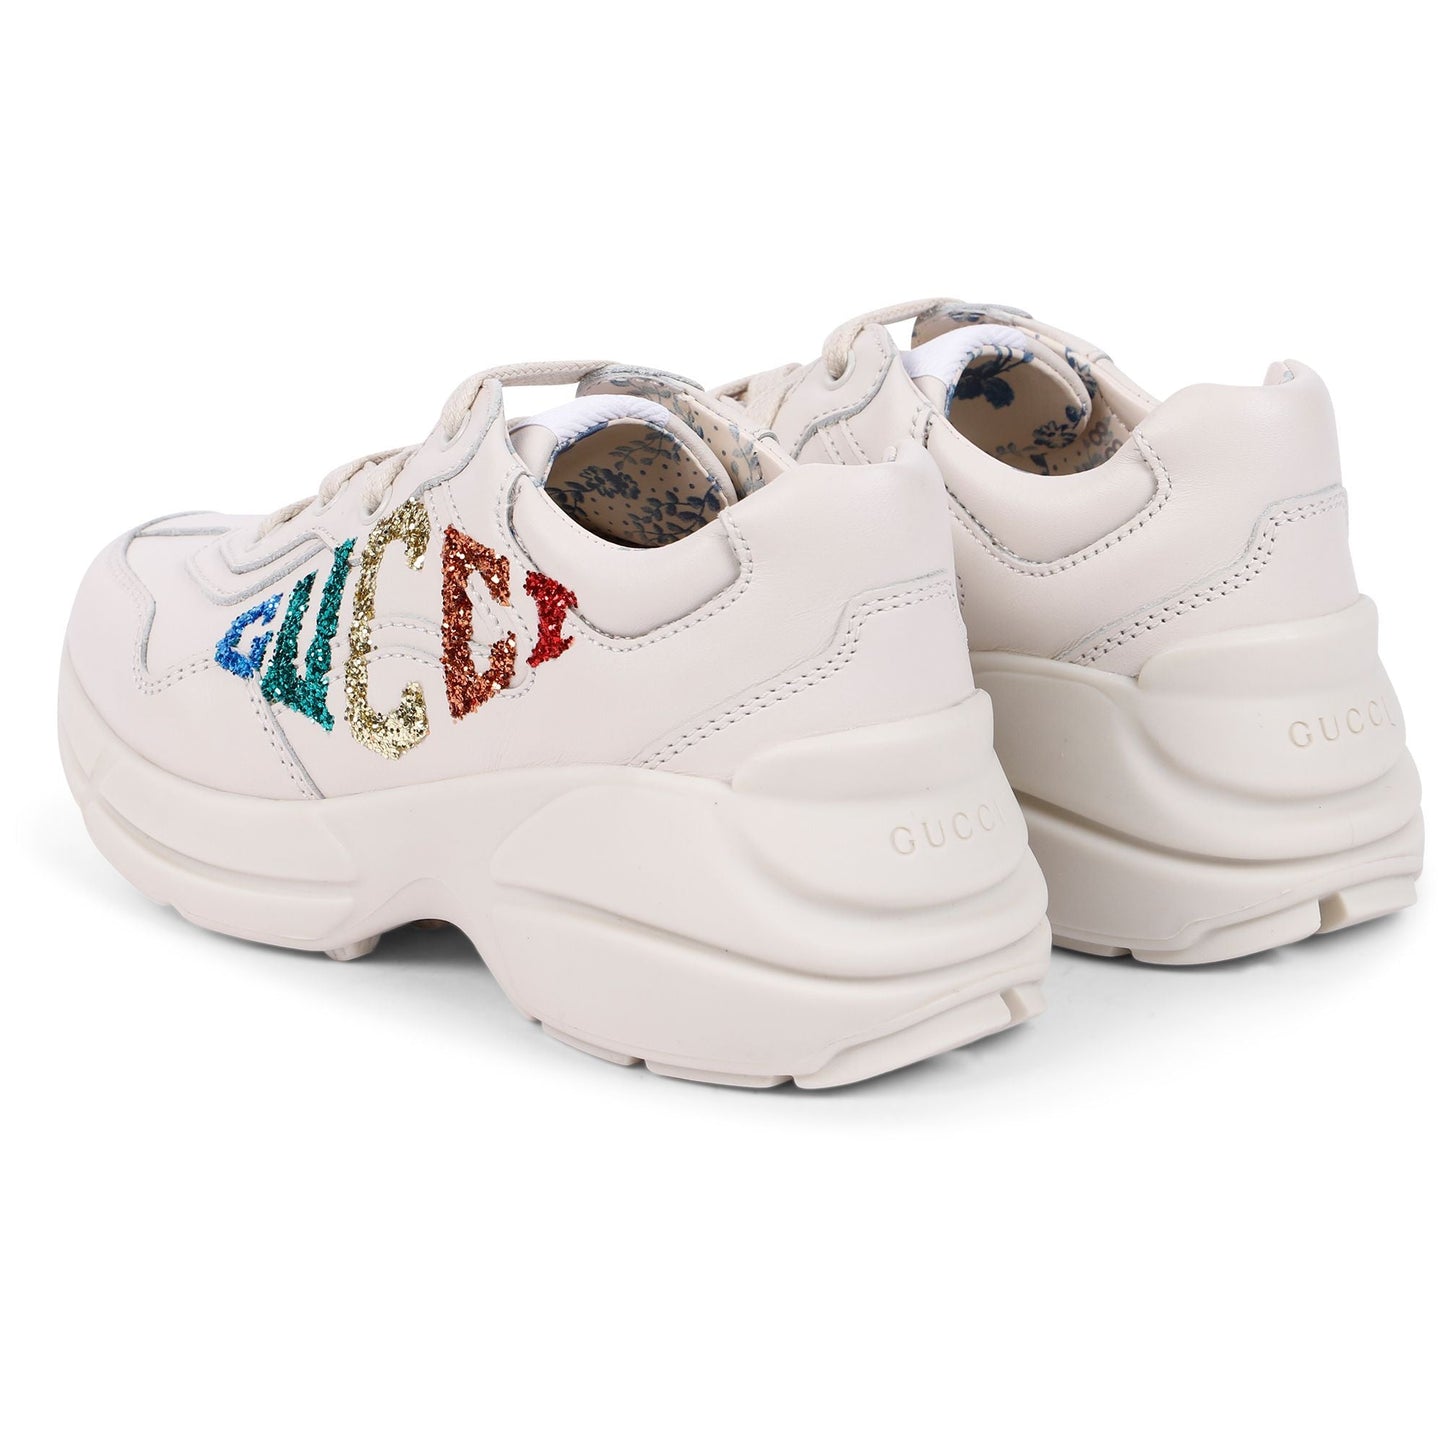 Girl GUCCI Rainbow Logo Sneakers in White